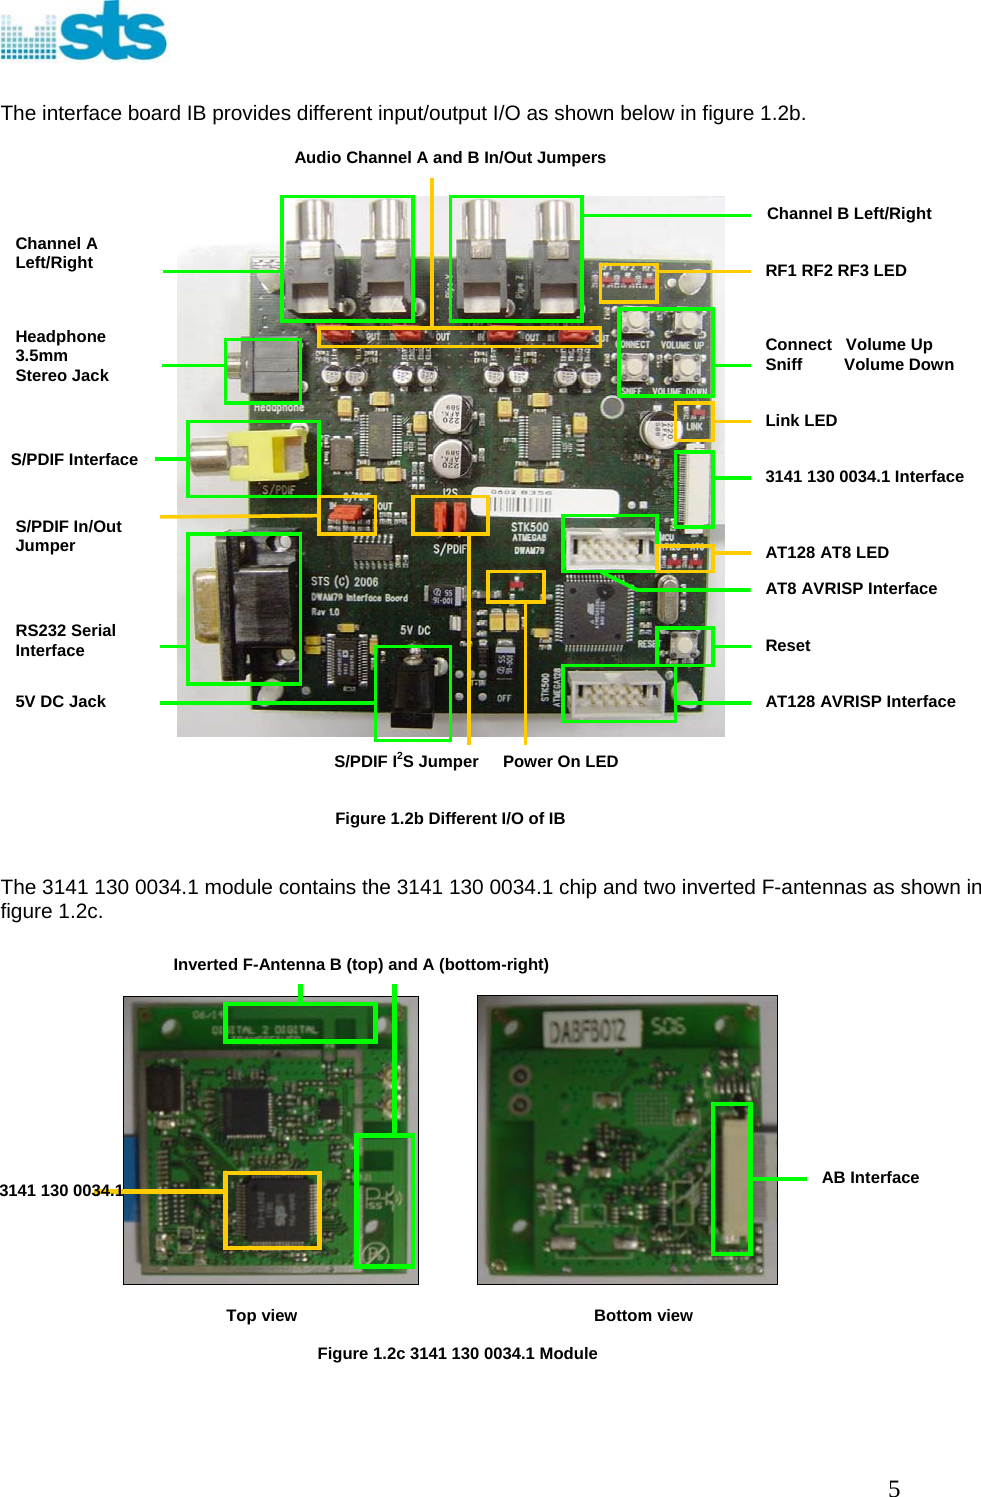   The interface board IB provides different input/output I/O as shown below in figure 1.2b.        Figure 1.2b Different I/O of IB   The 3141 130 0034.1 module contains the 3141 130 0034.1 chip and two inverted F-antennas as shown in figure 1.2c.                  AB Interface Inverted F-Antenna B (top) and A (bottom-right) 3141 130 0034.1 Interface Power On LED S/PDIF I2S Jumper S/PDIF In/Out Jumper RS232 Serial Interface 5V DC Jack AT128 AT8 LED Reset AT128 AVRISP Interface Link LED Connect   Volume Up Sniff         Volume Down RF1 RF2 RF3 LED S/PDIF Interface Channel A Left/Right Audio Channel A and B In/Out Jumpers Headphone 3.5mm  Stereo Jack Channel B Left/Right AT8 AVRISP Interface 3141 130 0034.1      Top view                                                                Bottom view  Figure 1.2c 3141 130 0034.1 Module     5